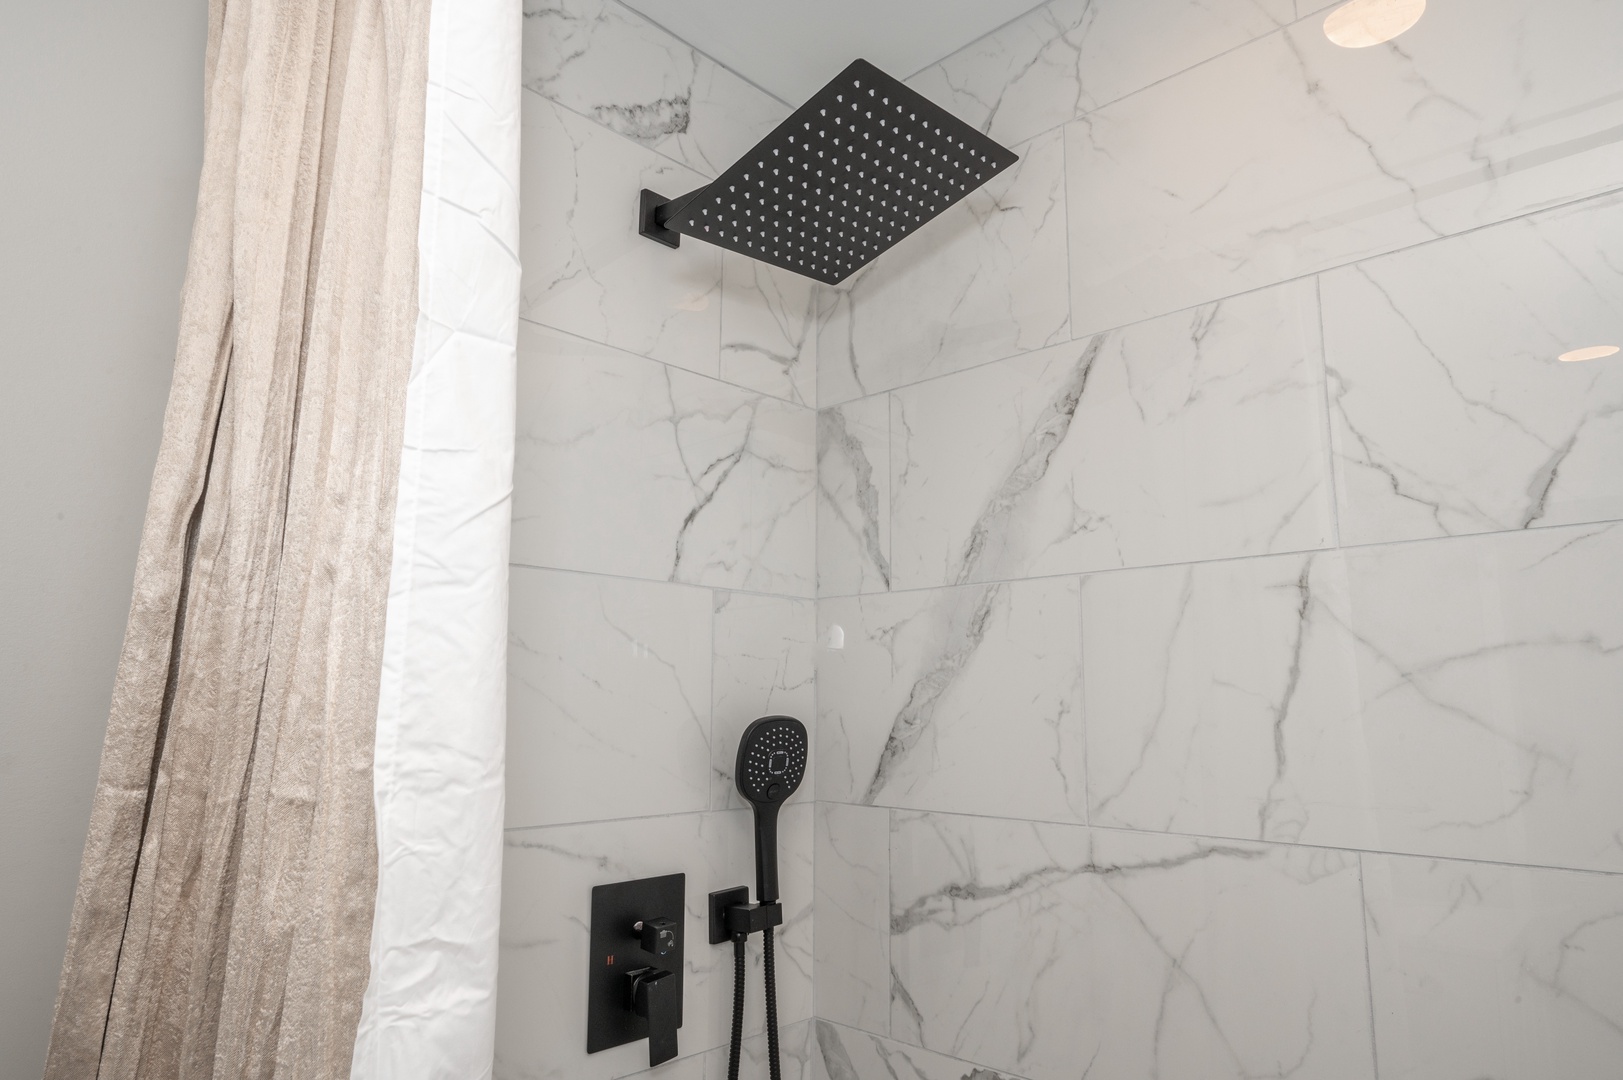 Apt 1 – The full bathroom offers a walk-in shower & chic finishes